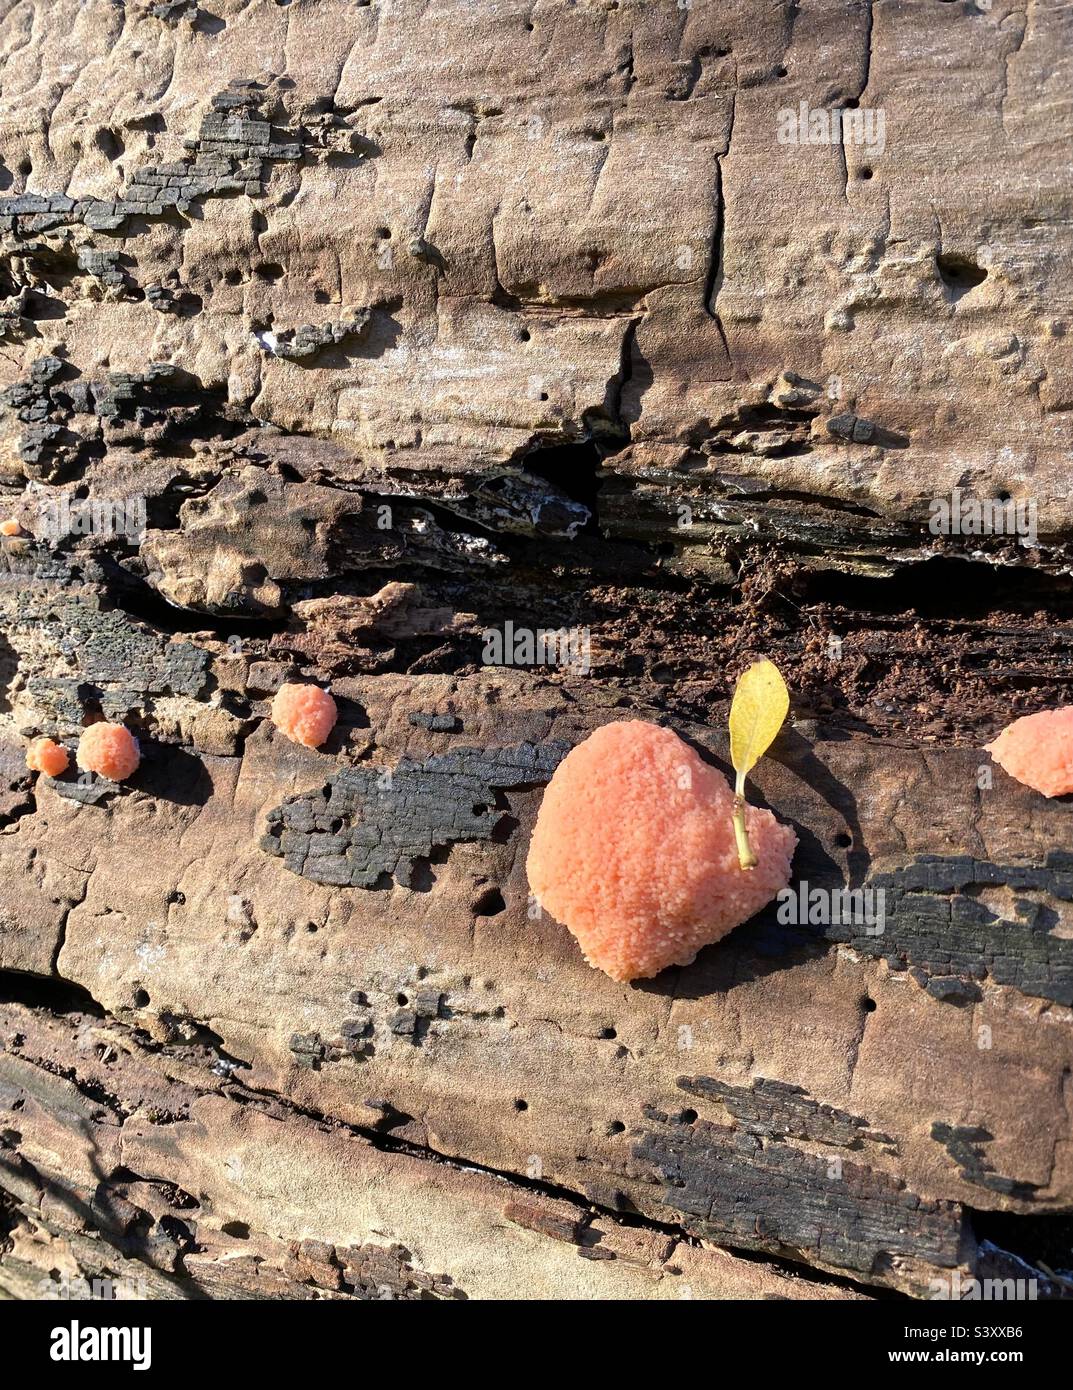 Tubifera arachnoidea or Tubifera ferruginosa growing on rotten wood. It is a genus of slime mould. A fallen leaf caught on the slime mould makes it look like an apple or a peach. Stock Photo